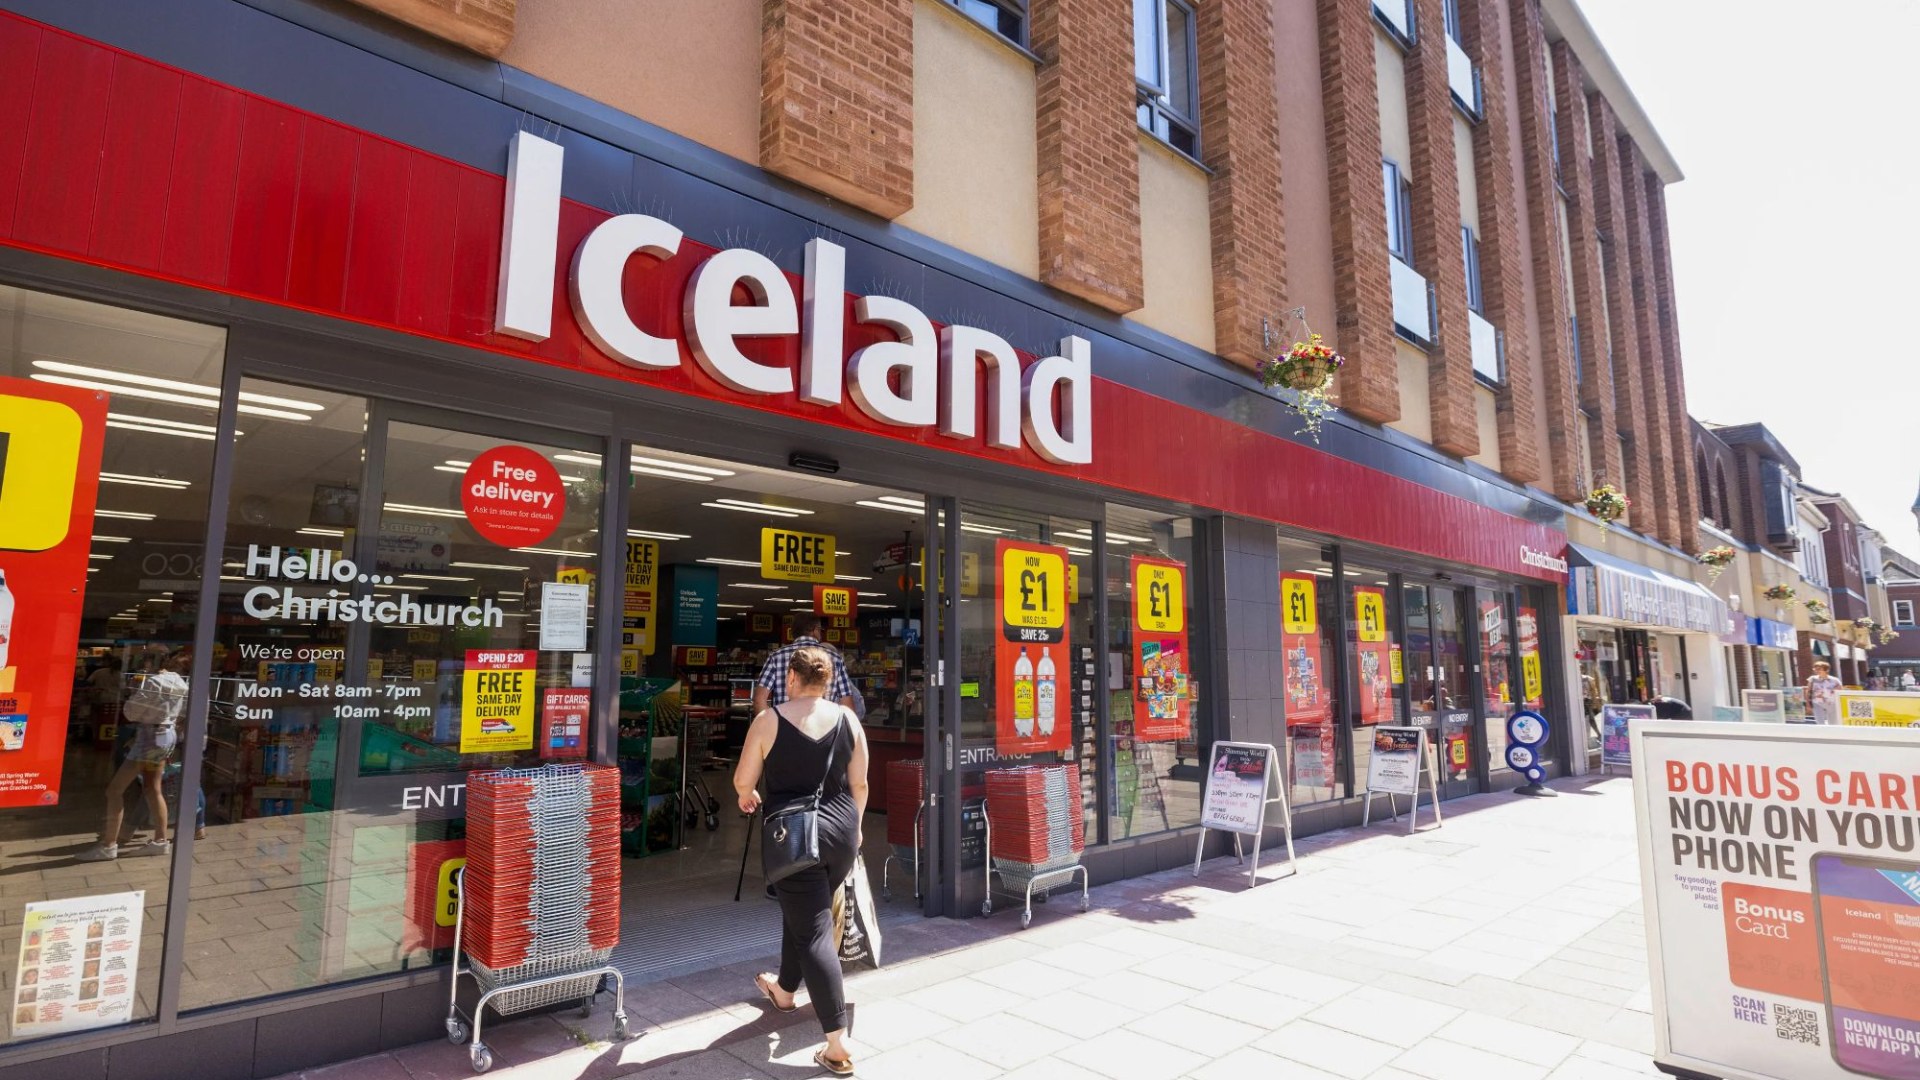 ‘I need these’ cry Iceland fans racing to snap up forgotten chocolate treat spotted in stores for bargain price [Video]